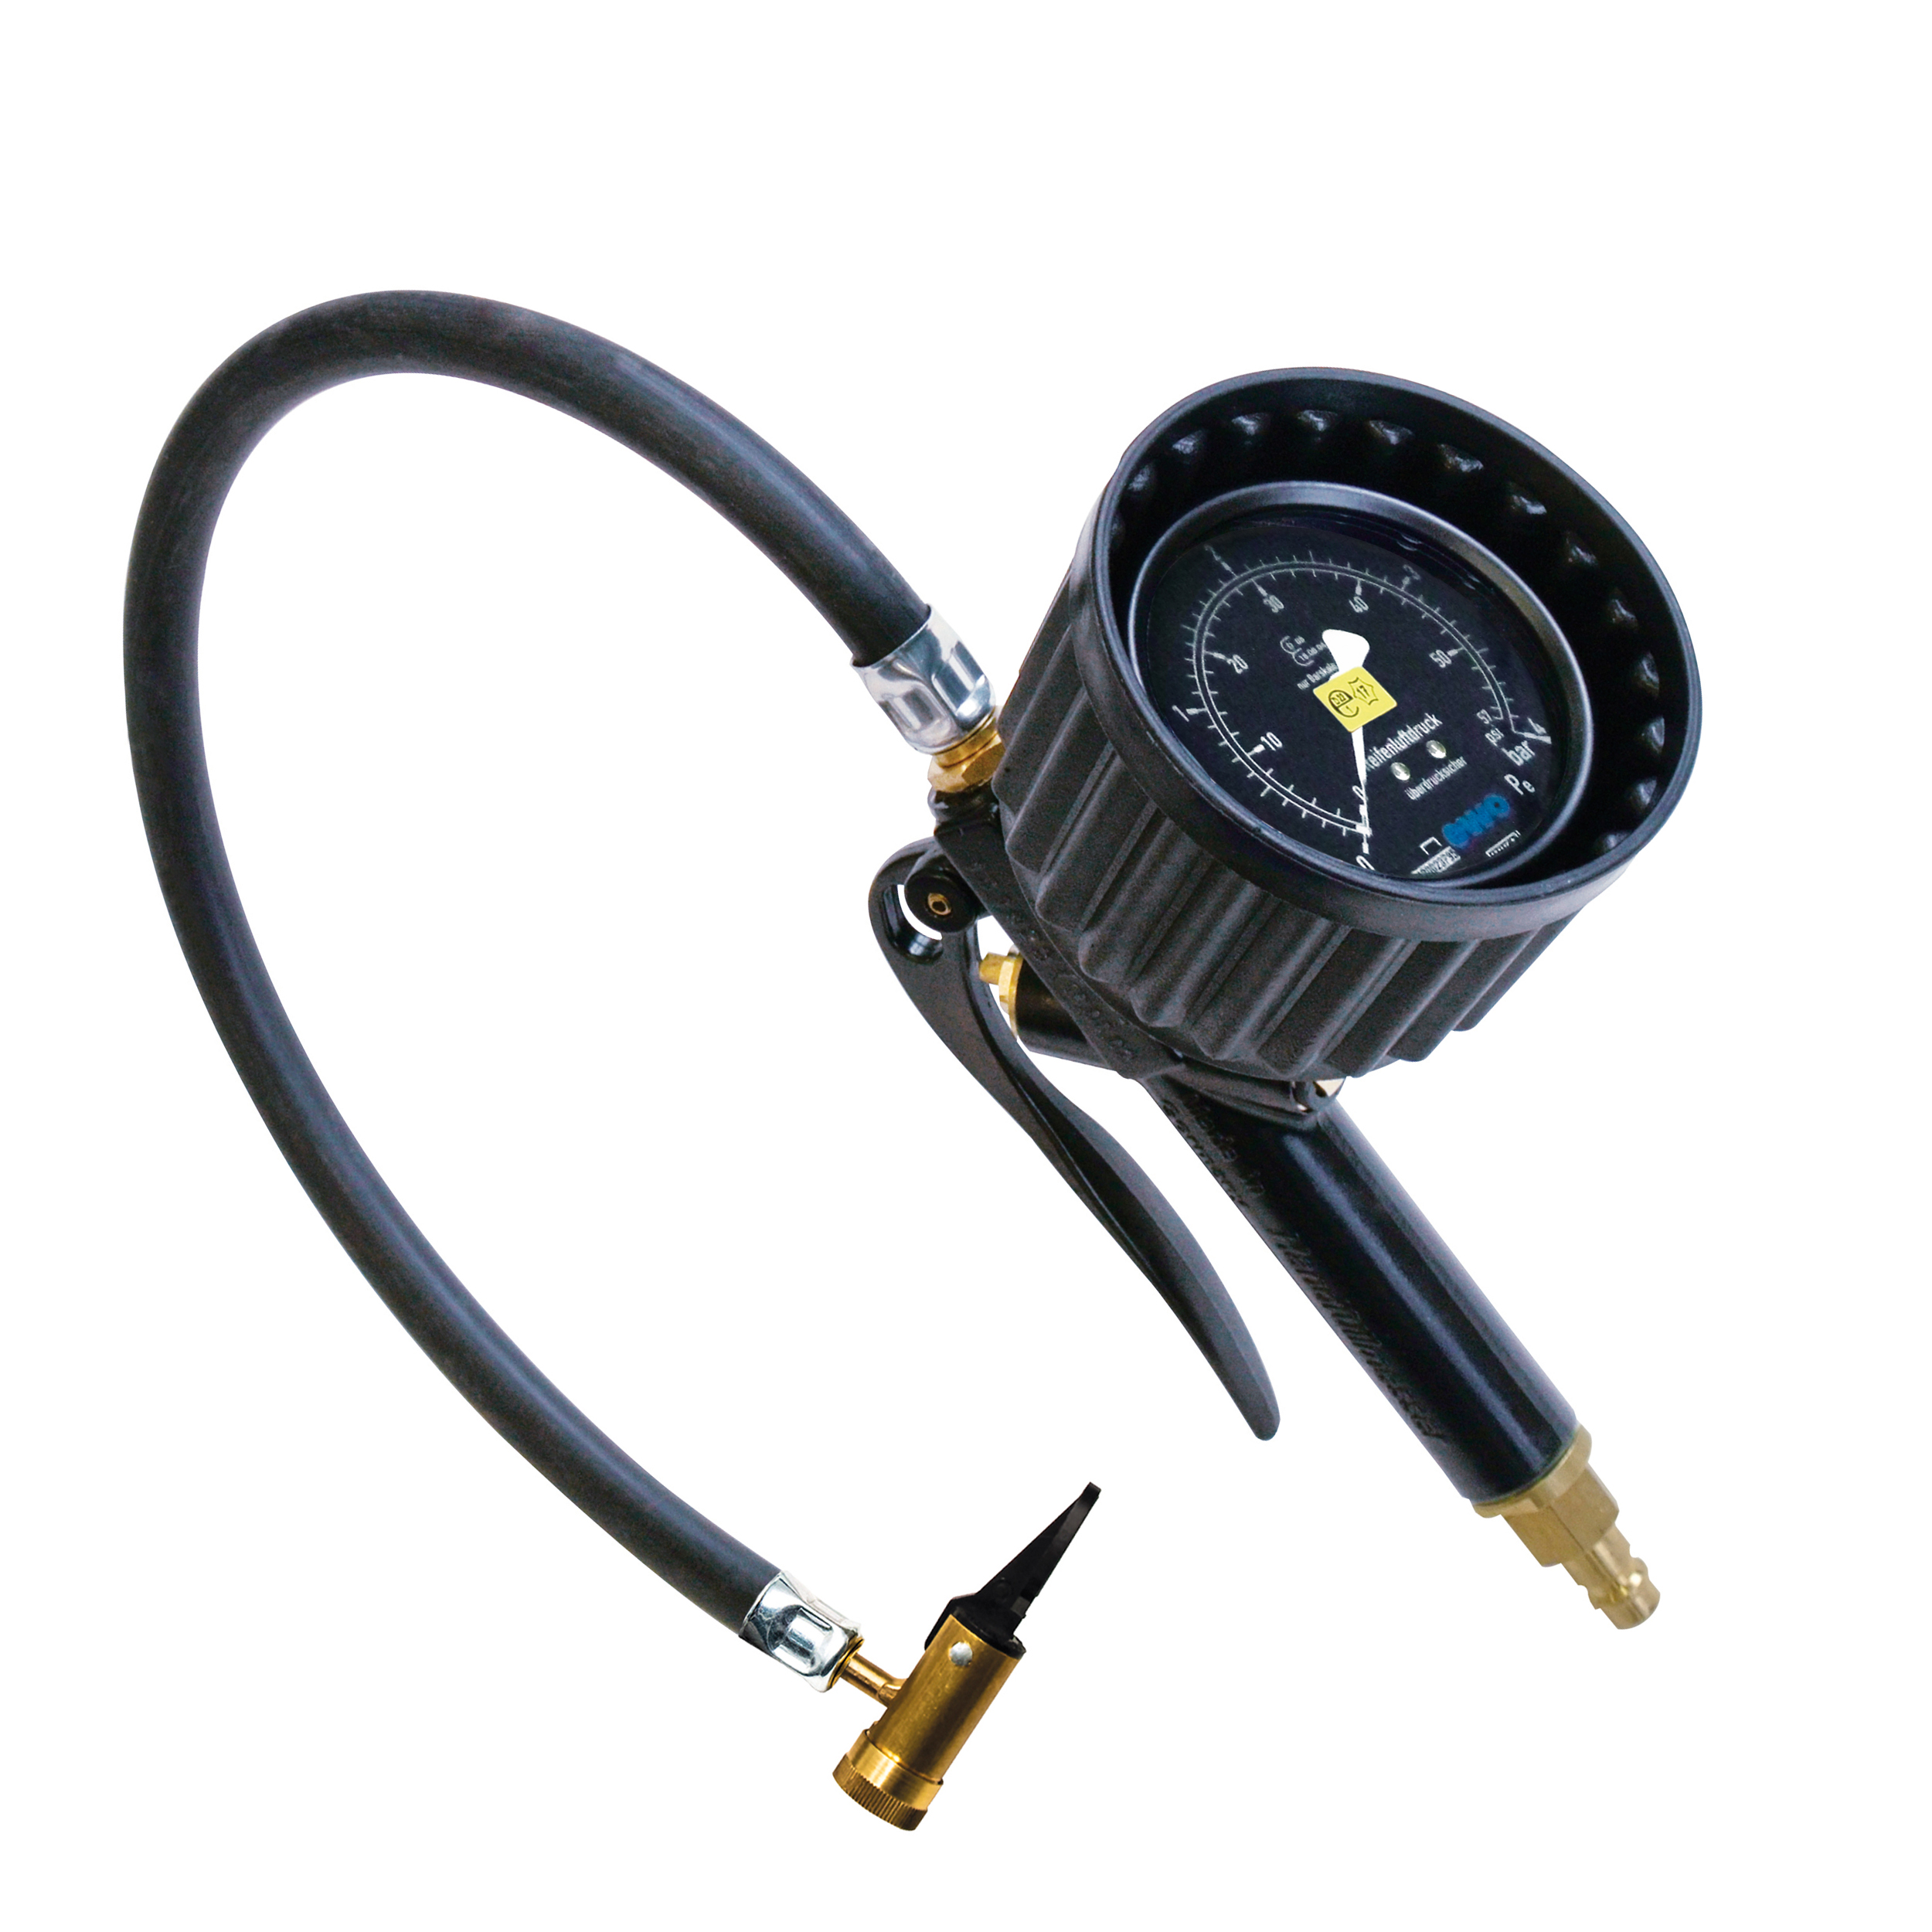 Hand tyre inflator euroair, lever-valve connector, 0–4 bar/56 psi, weight: 1,250 g, filling hose 0.5 m, calibrated